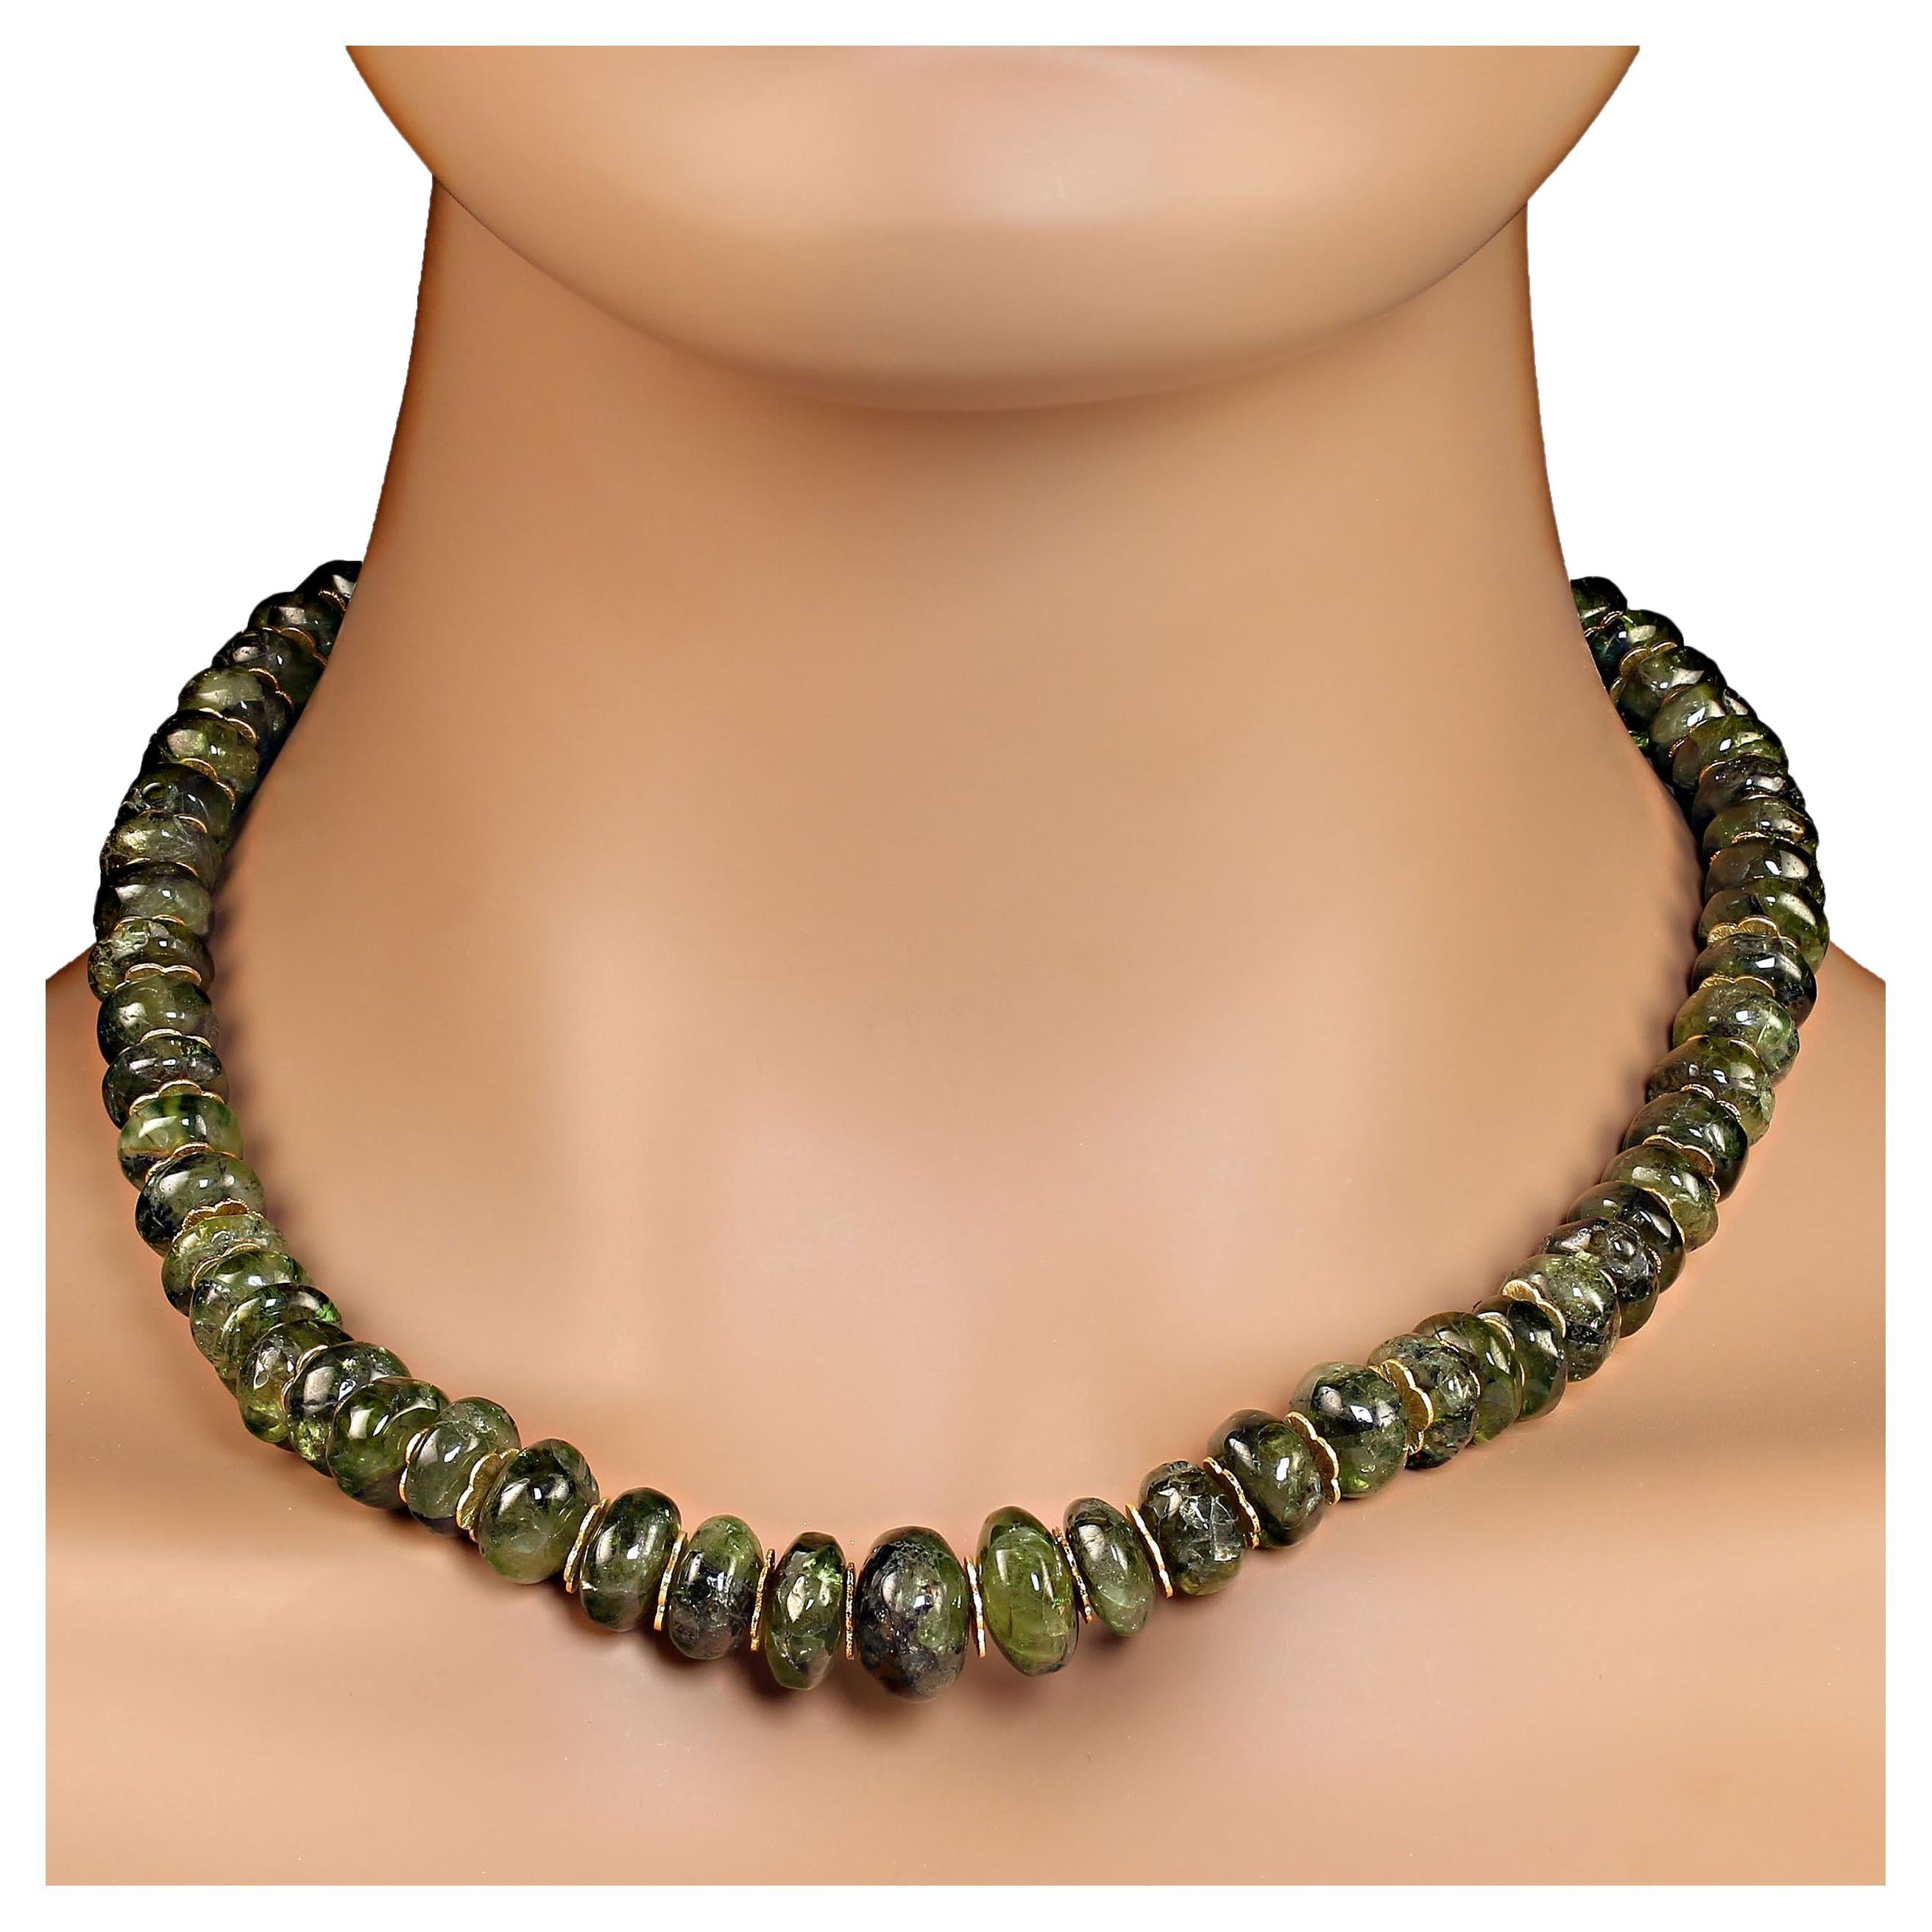 AJD Unique 19 In Graduated Green Garnet Necklace with goldy accents  Great Gift!